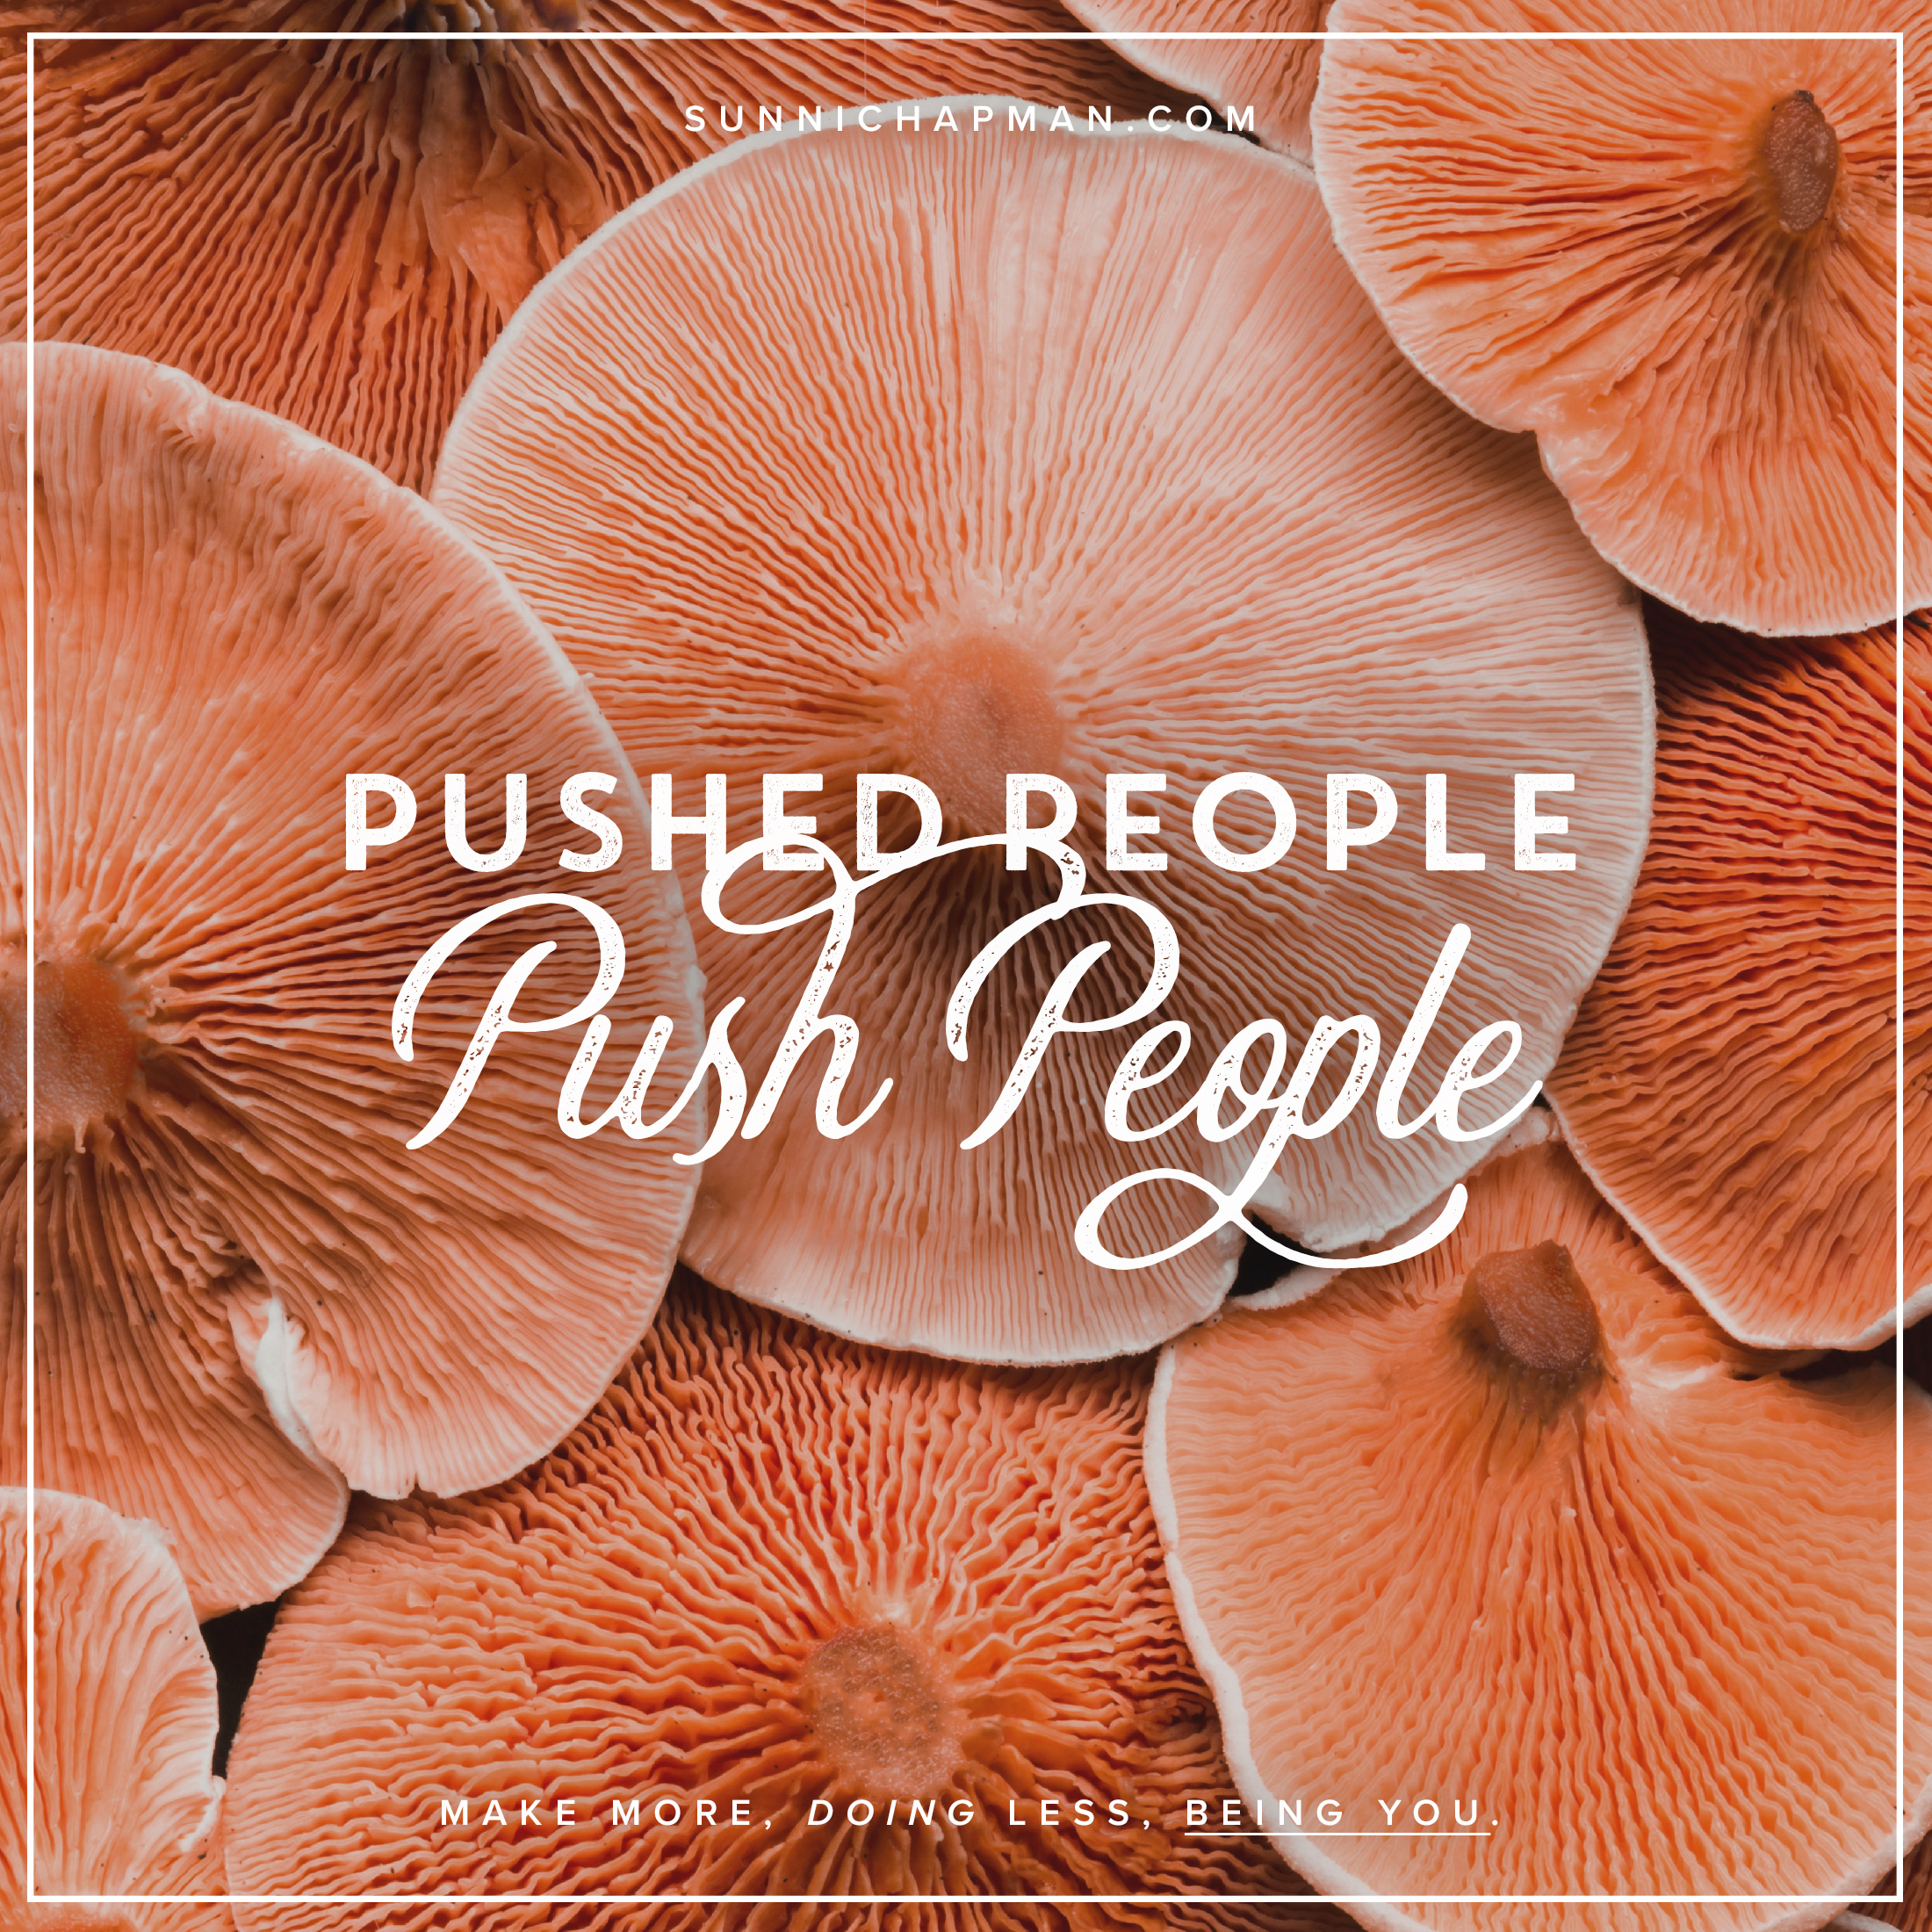 The image displays a collection of orange and coral colored mushrooms closely packed together. Overlaid on the image is text in white that reads: "PUSHED PEOPLE Push People". Below that, in smaller text, it reads: "MAKE MORE, DOING LESS, BEING YOU." At the top right corner, the text "sunnichapman.com" is included, likely indicating the source or creator of the image. The overall design appears to be a motivational and inspirational graphic.